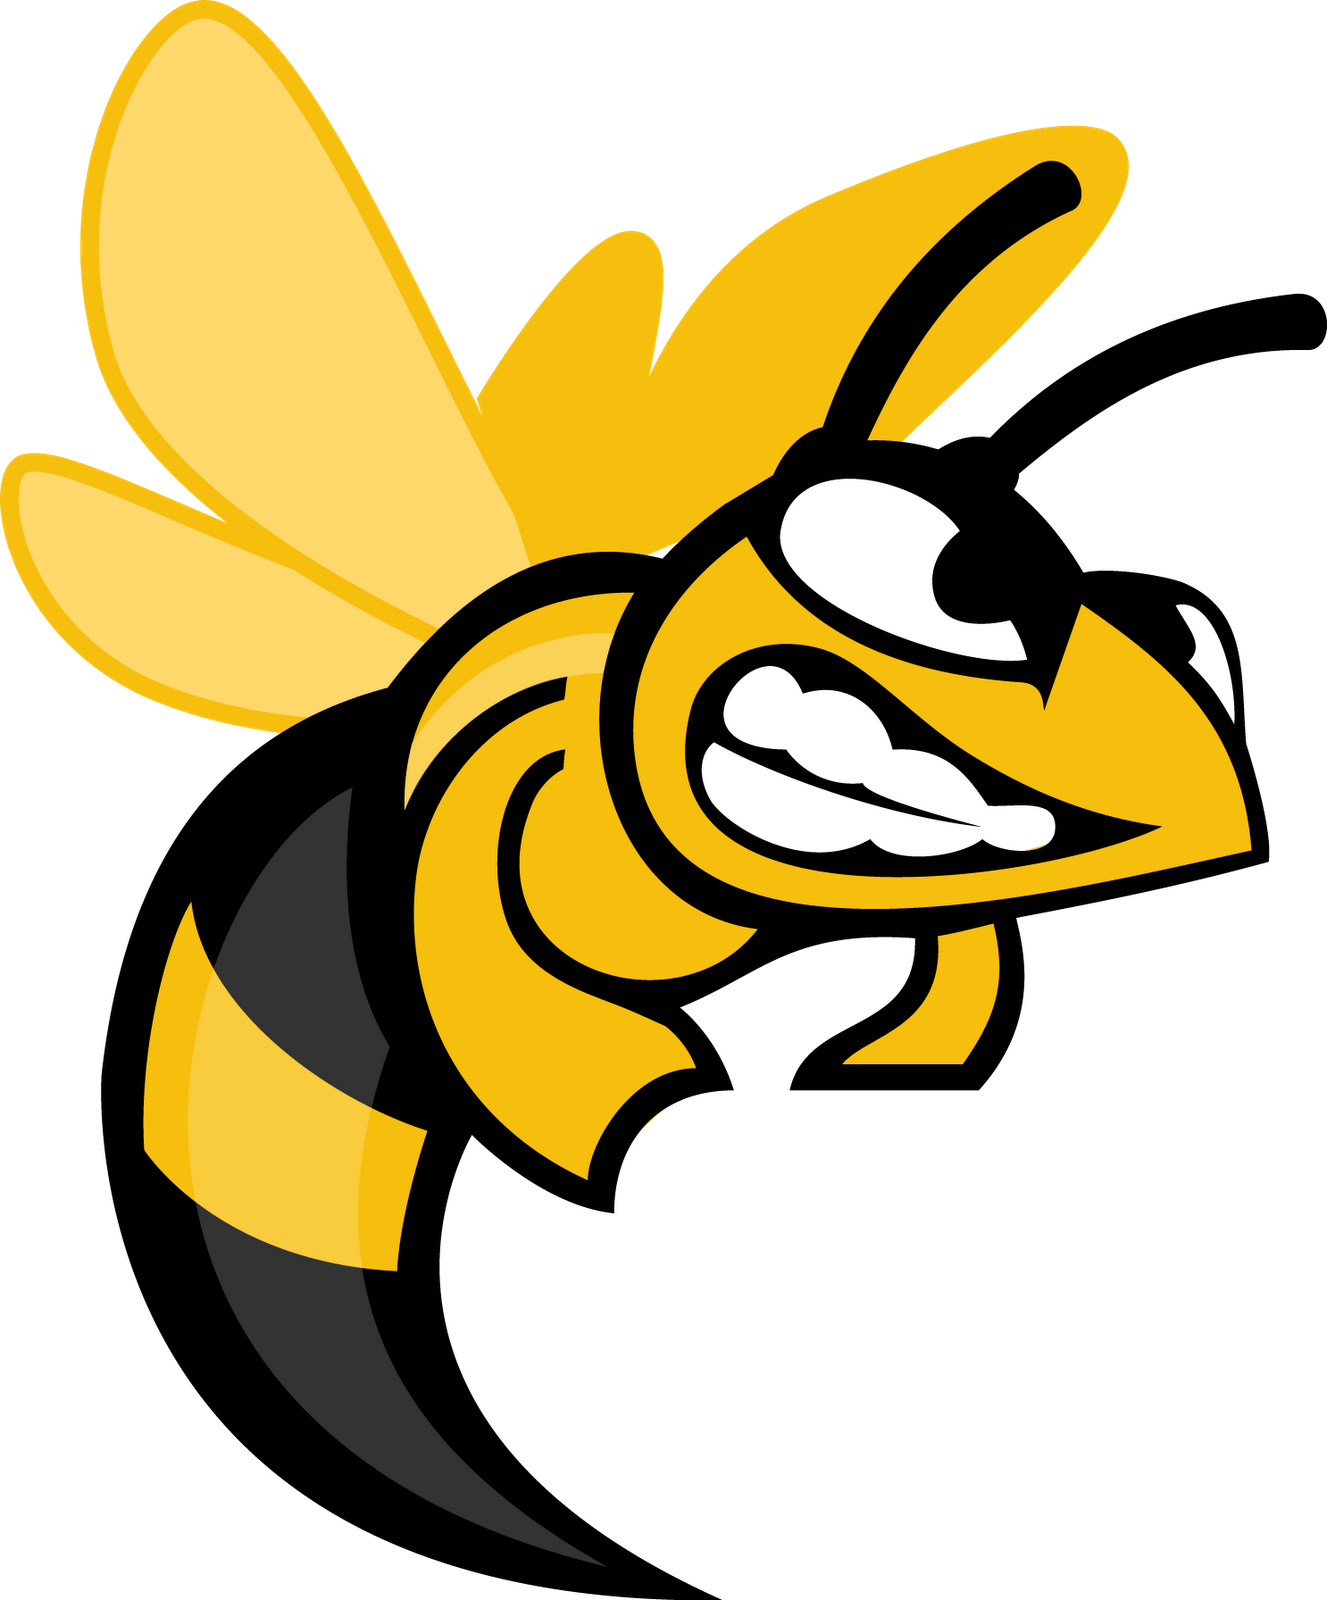 Hornet Clipart Cliparts And Others Art Inspiration - Suny Broome Community College (1327x1600)